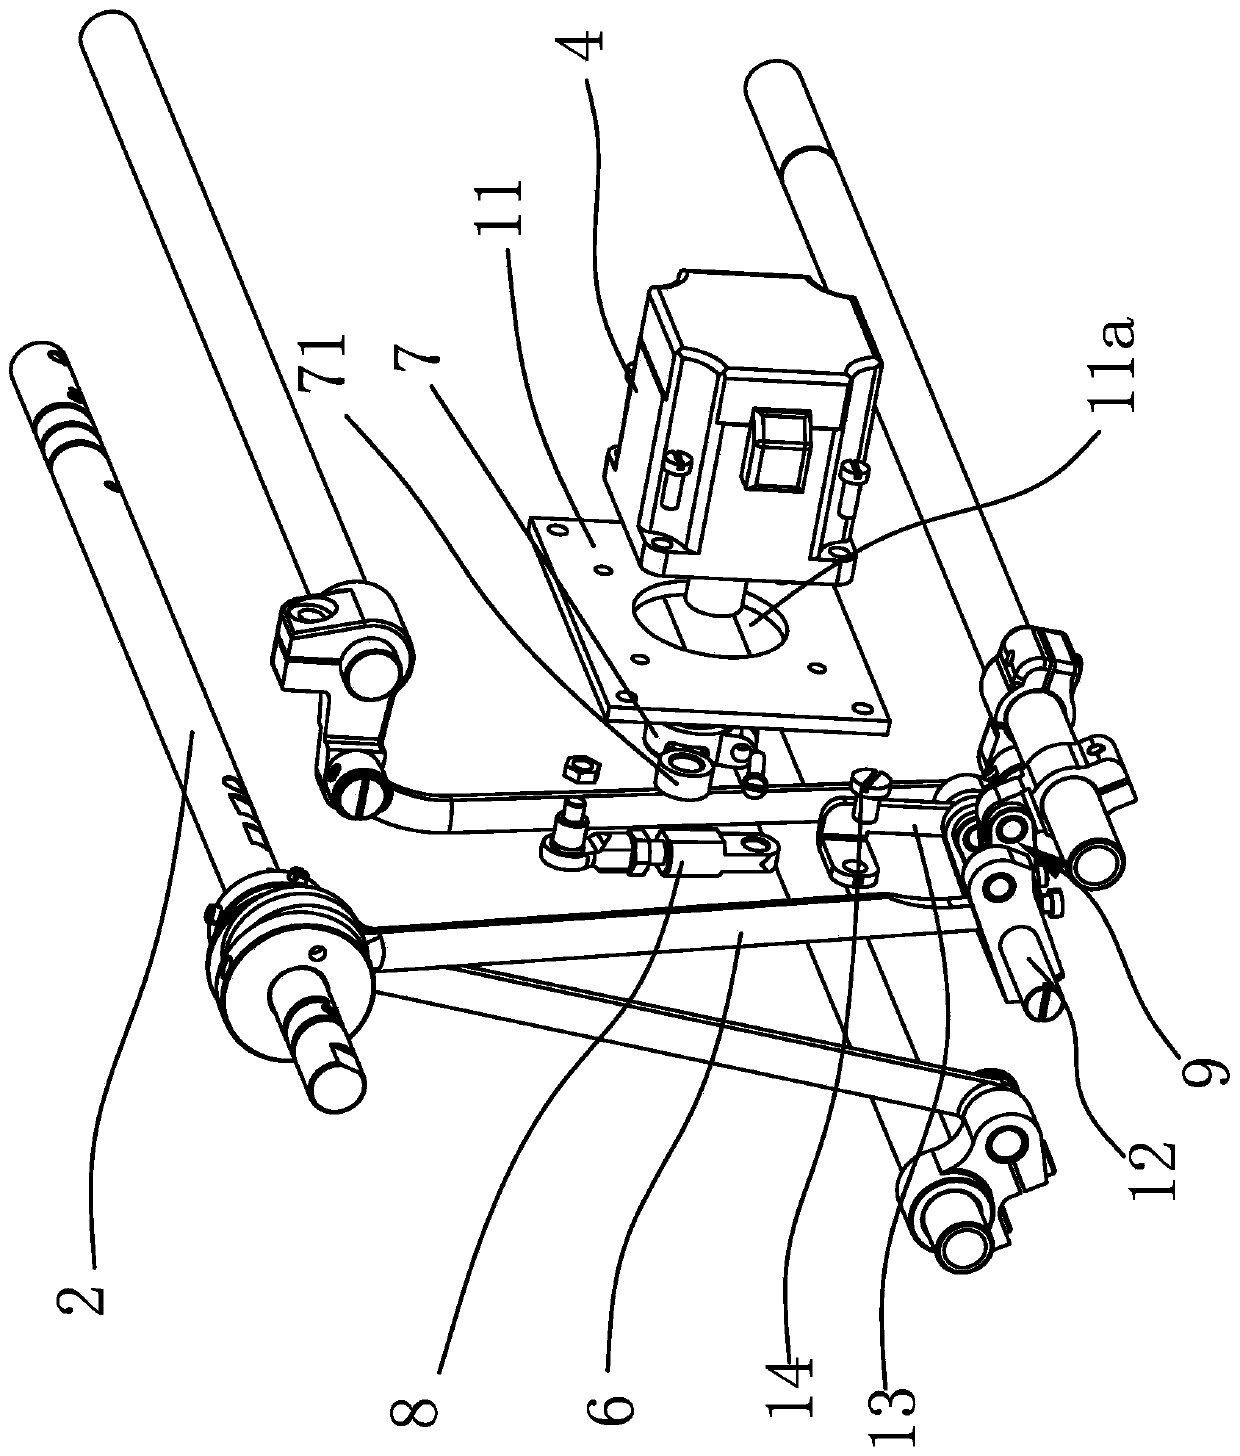 Sewing machine and stitch-length adjusting and backstitch control method for sewing machine